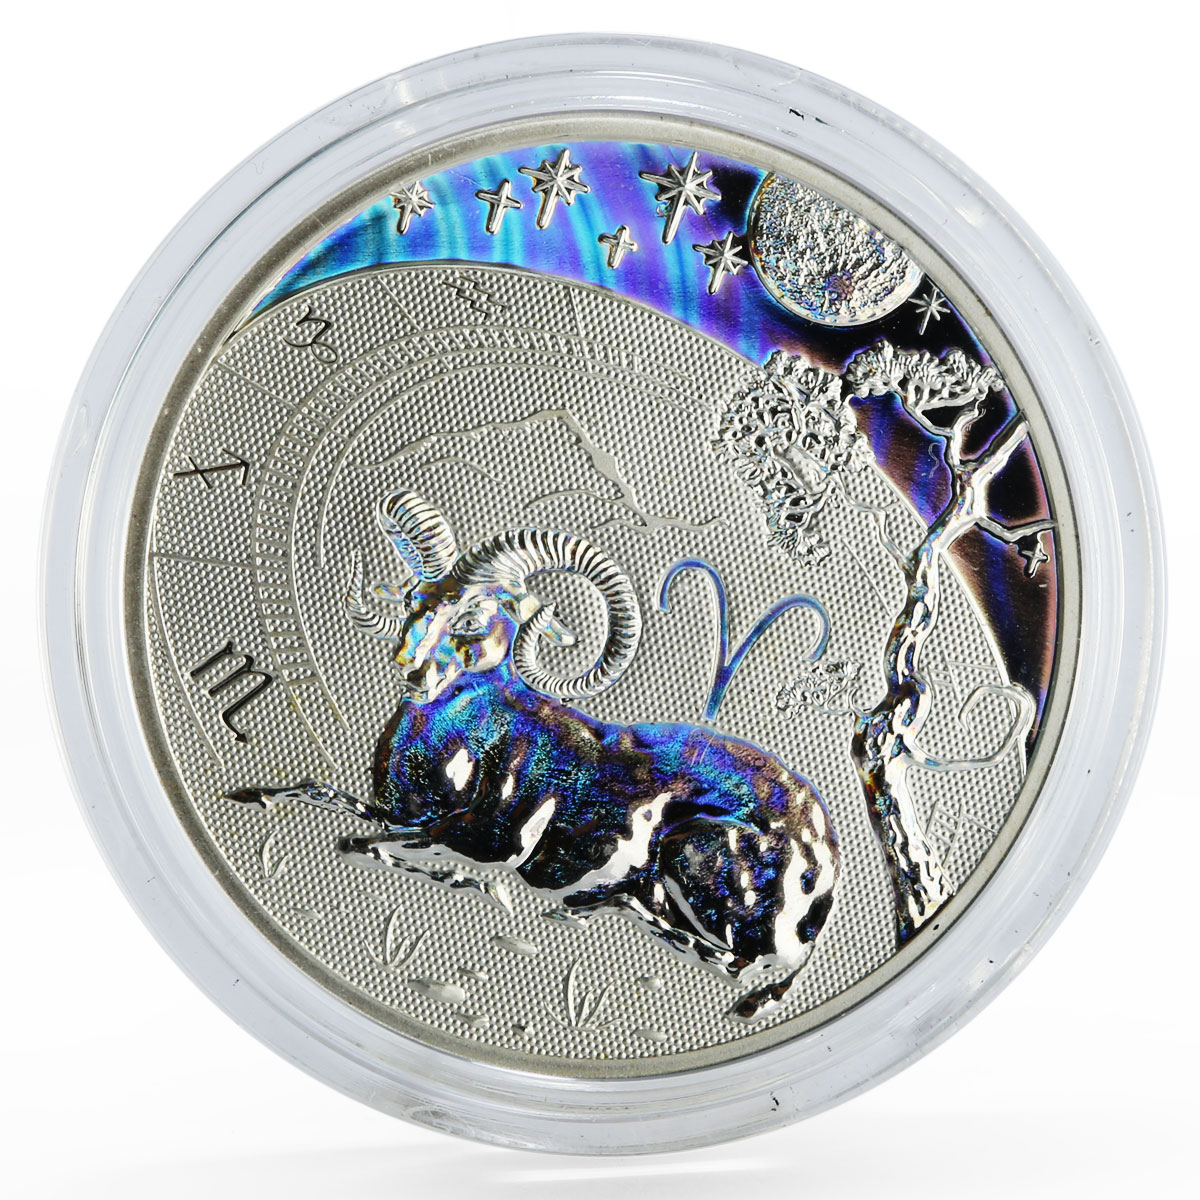 Cameroon 500 francs Zodiac Signs series Aries hologram silver coin 2010